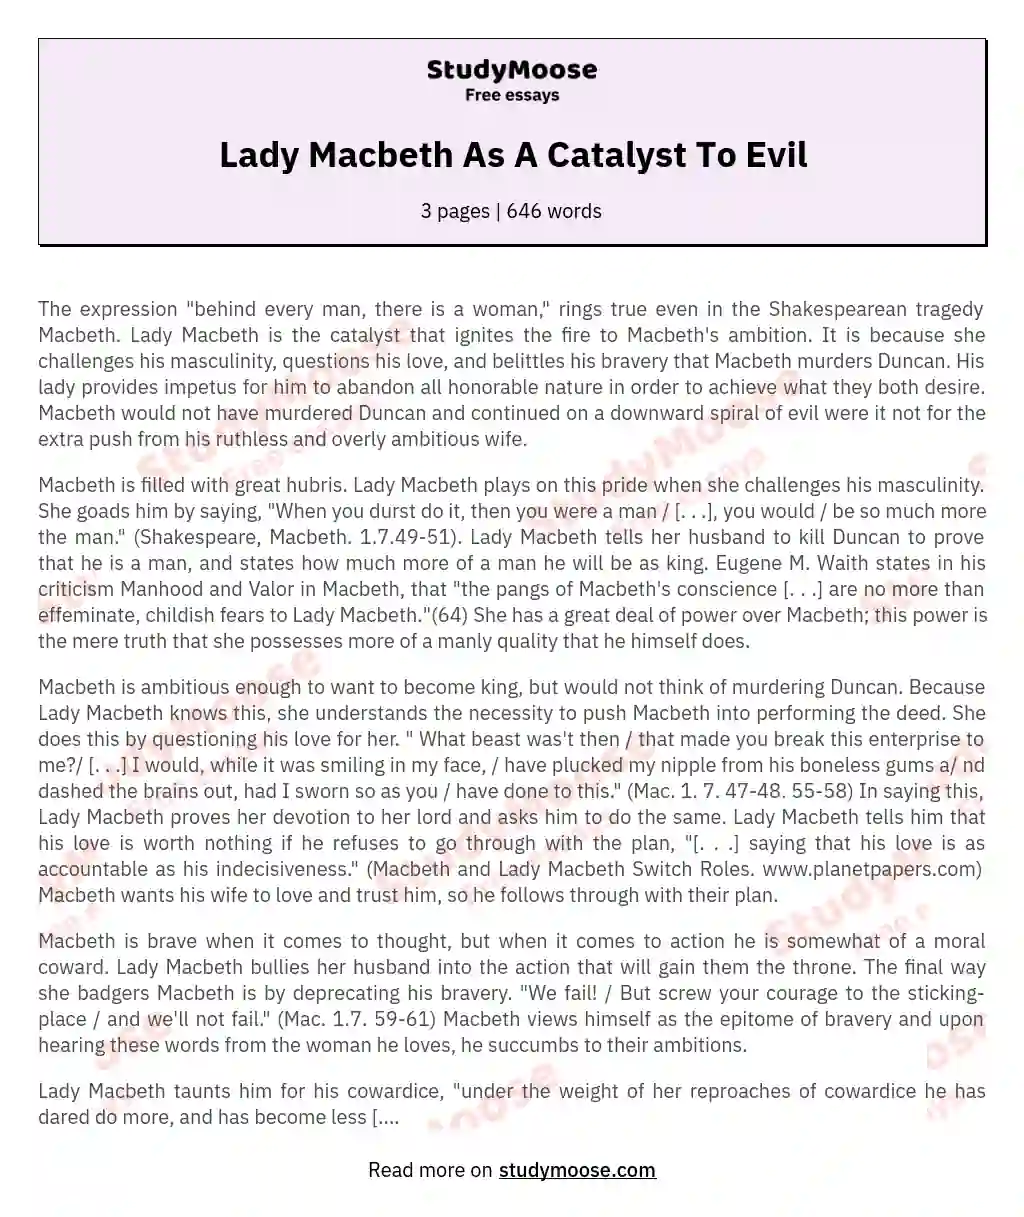 Lady Macbeth As A Catalyst To Evil essay